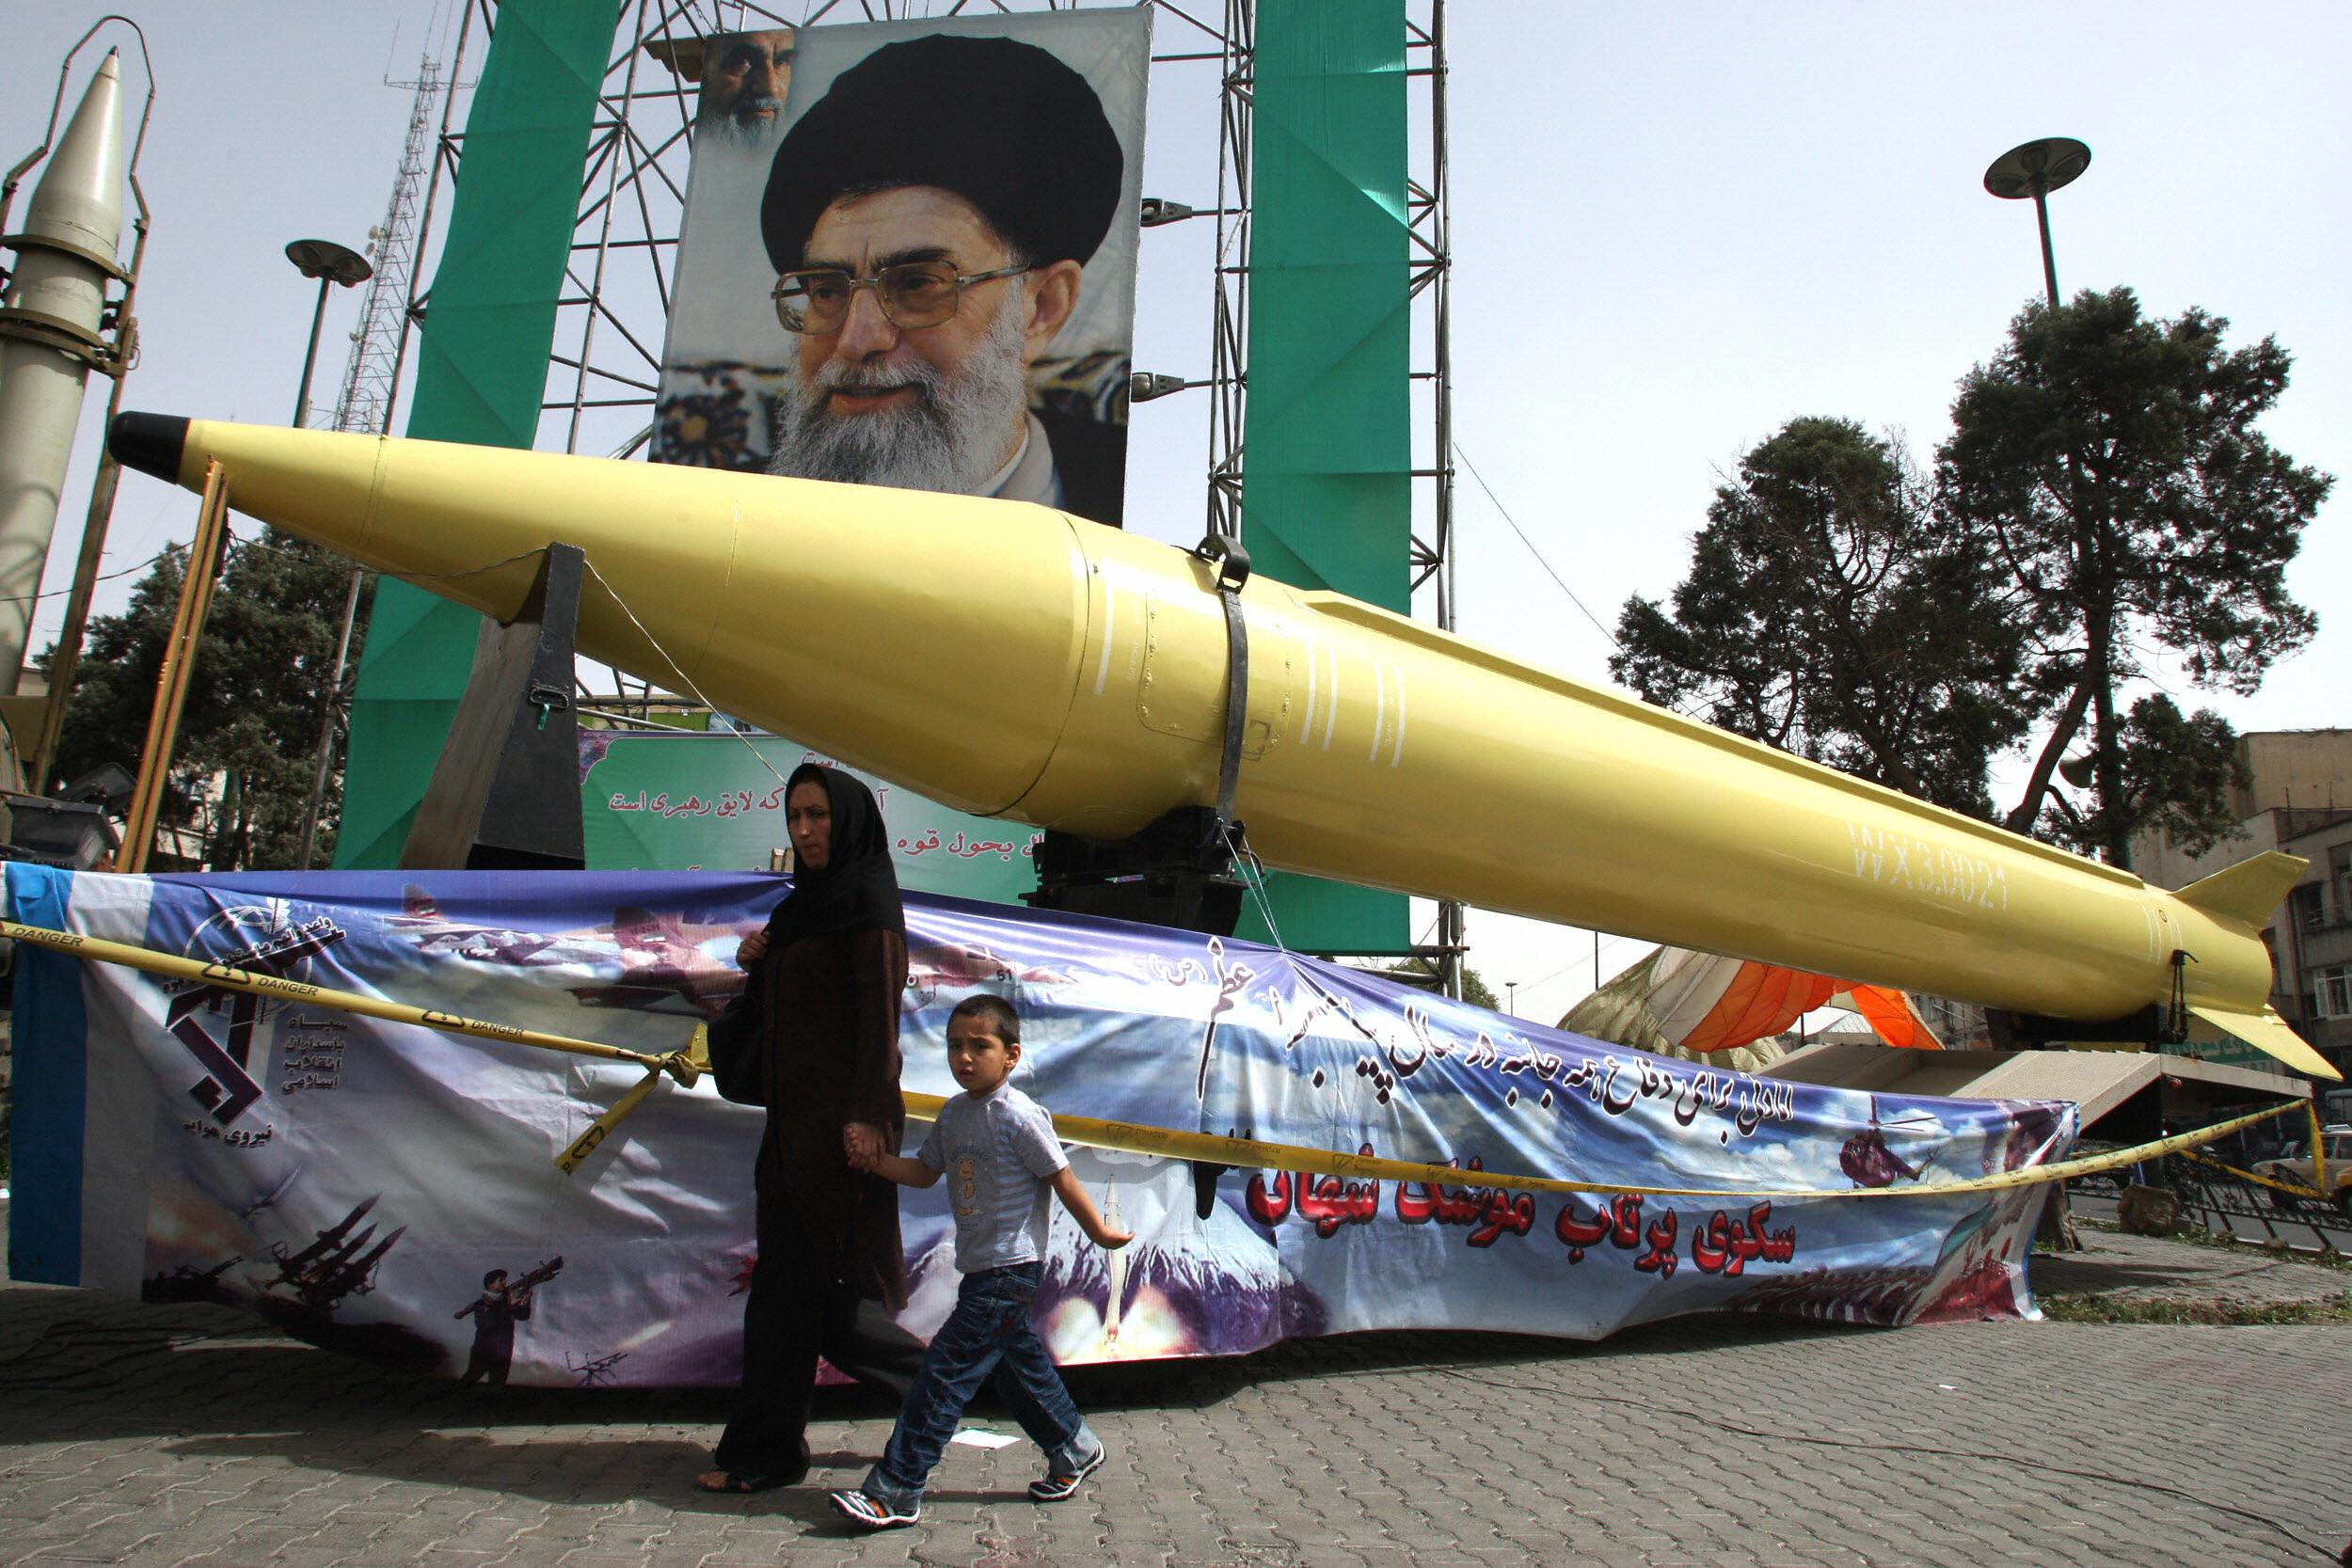 Iran To Test-Fire Missiles “If Necessary”